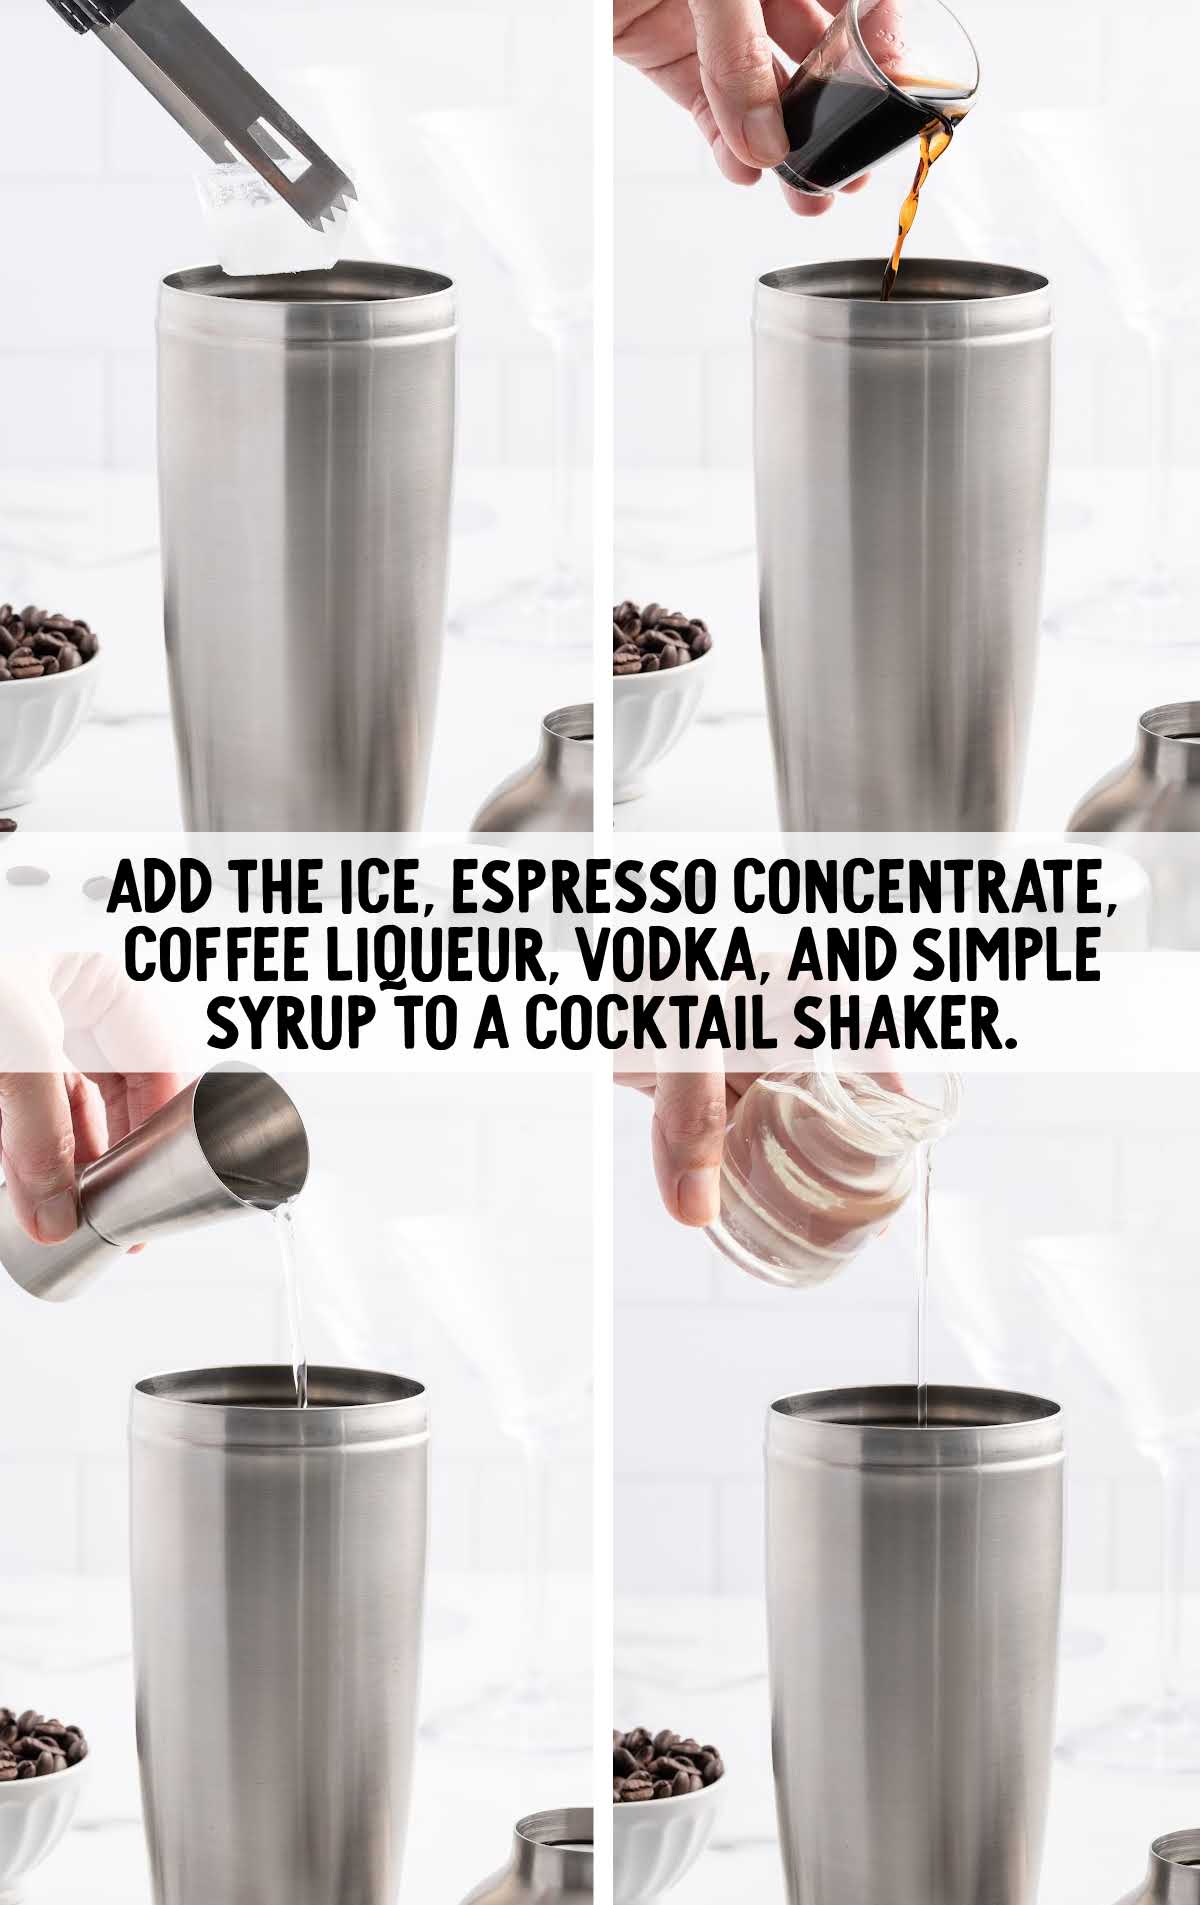 ice, espresso concentrate, coffee liqueur, vodka, and syrup added to a cocktail shaker